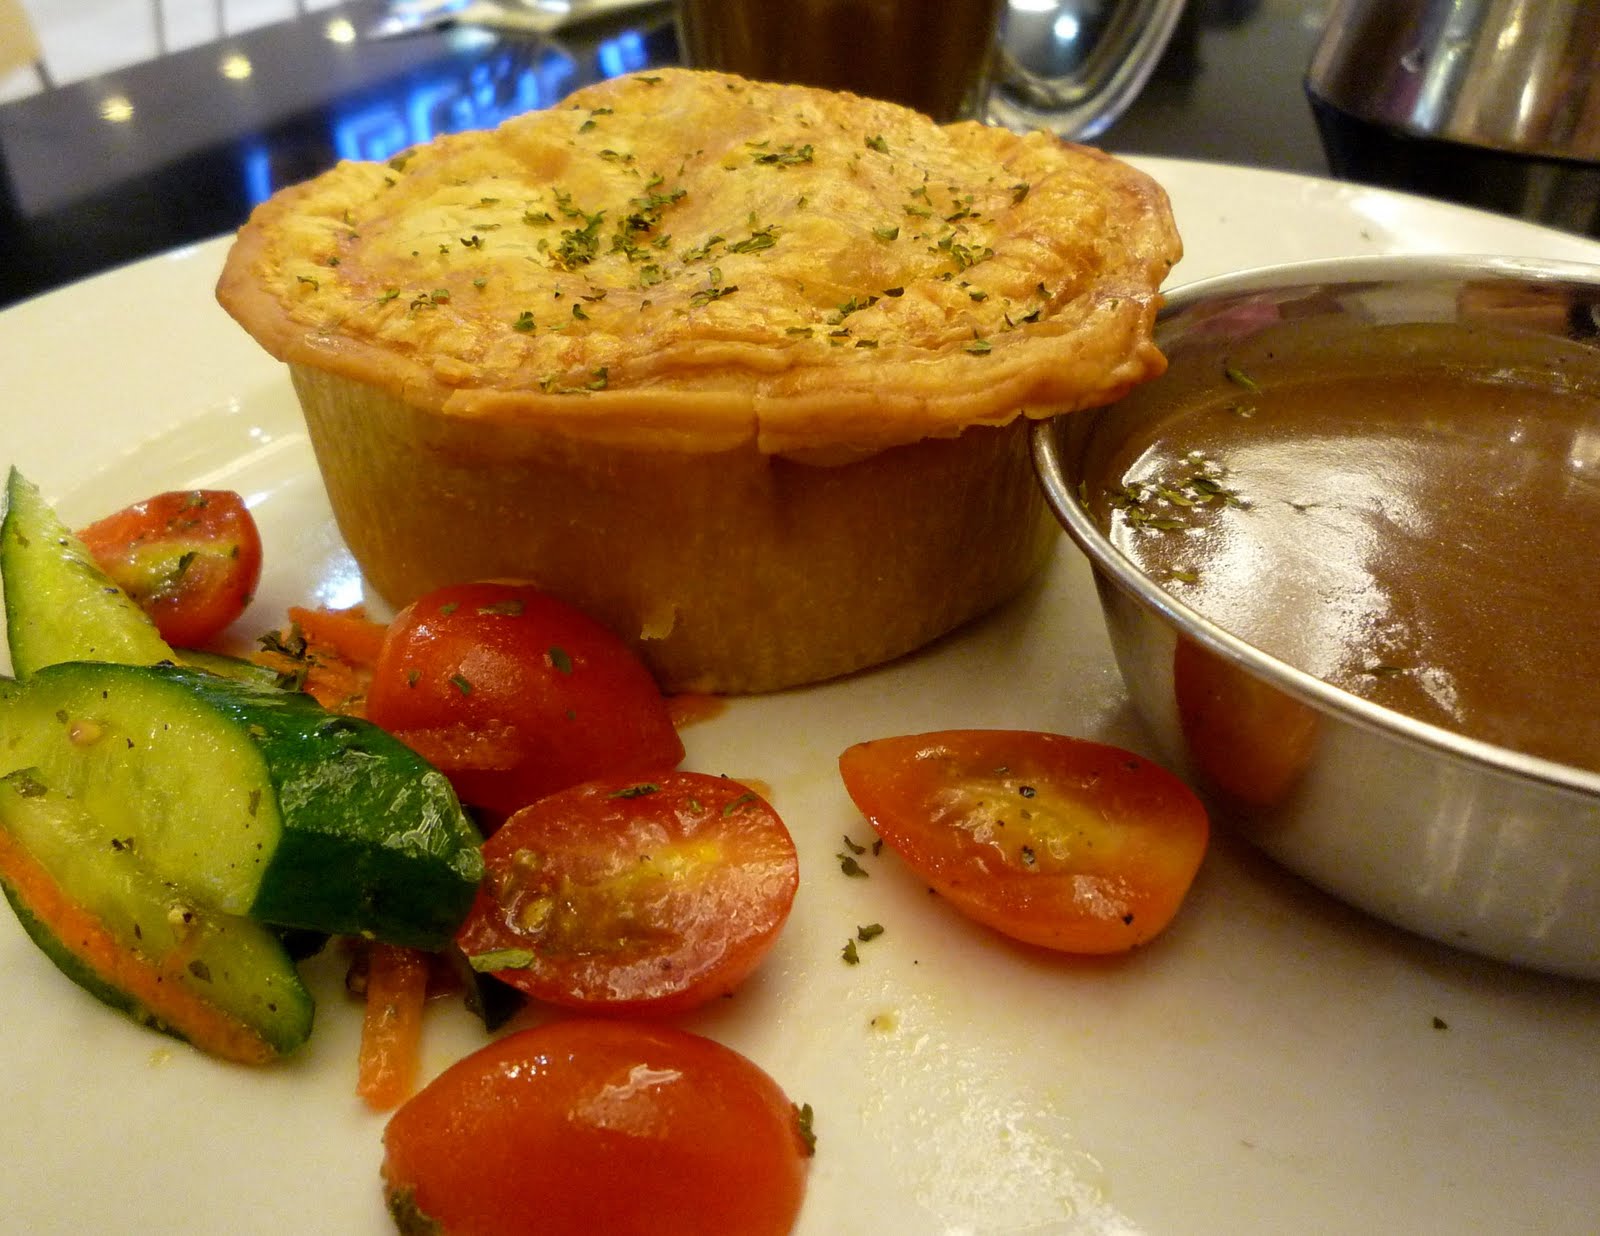 A Coffeeholic's Travel Tale: Gourmet Chicken Pie at Dave's Deli